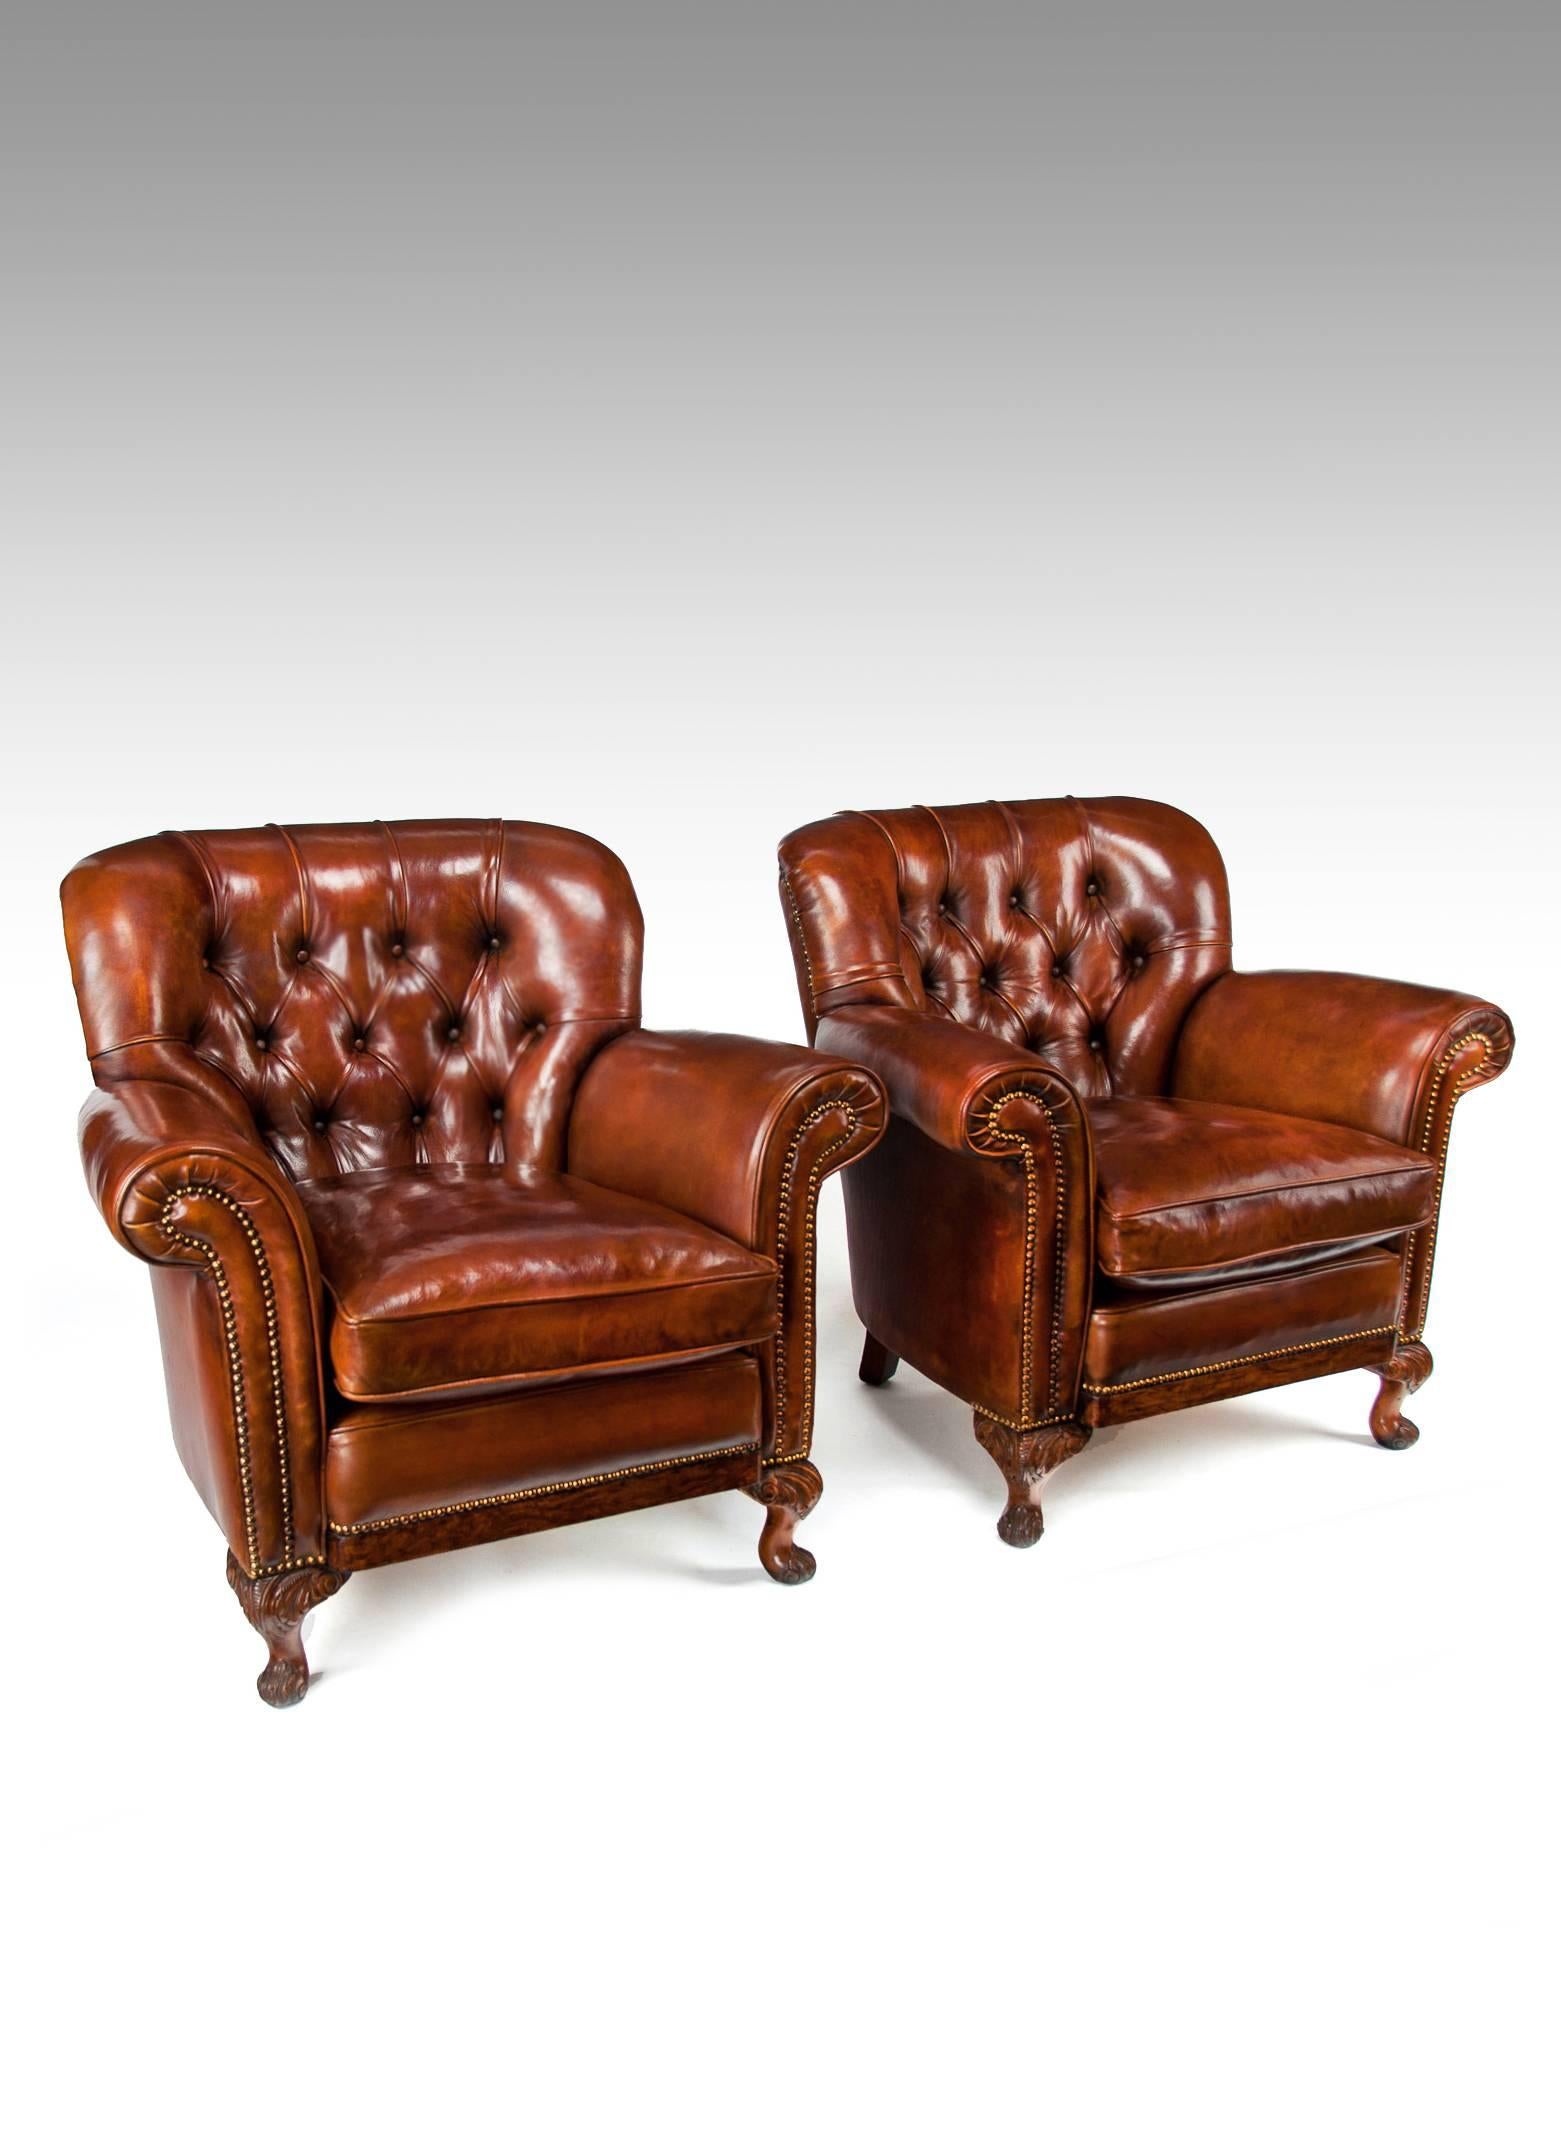 A very handsome pair of antique leather upholstered walnut shaped armchairs on carved cabriole legs dating to circa 1910-1920.
These very well drawn pair of armchairs have a very comfortable feathered cushion seat and a shaped back. 
Of elegant form